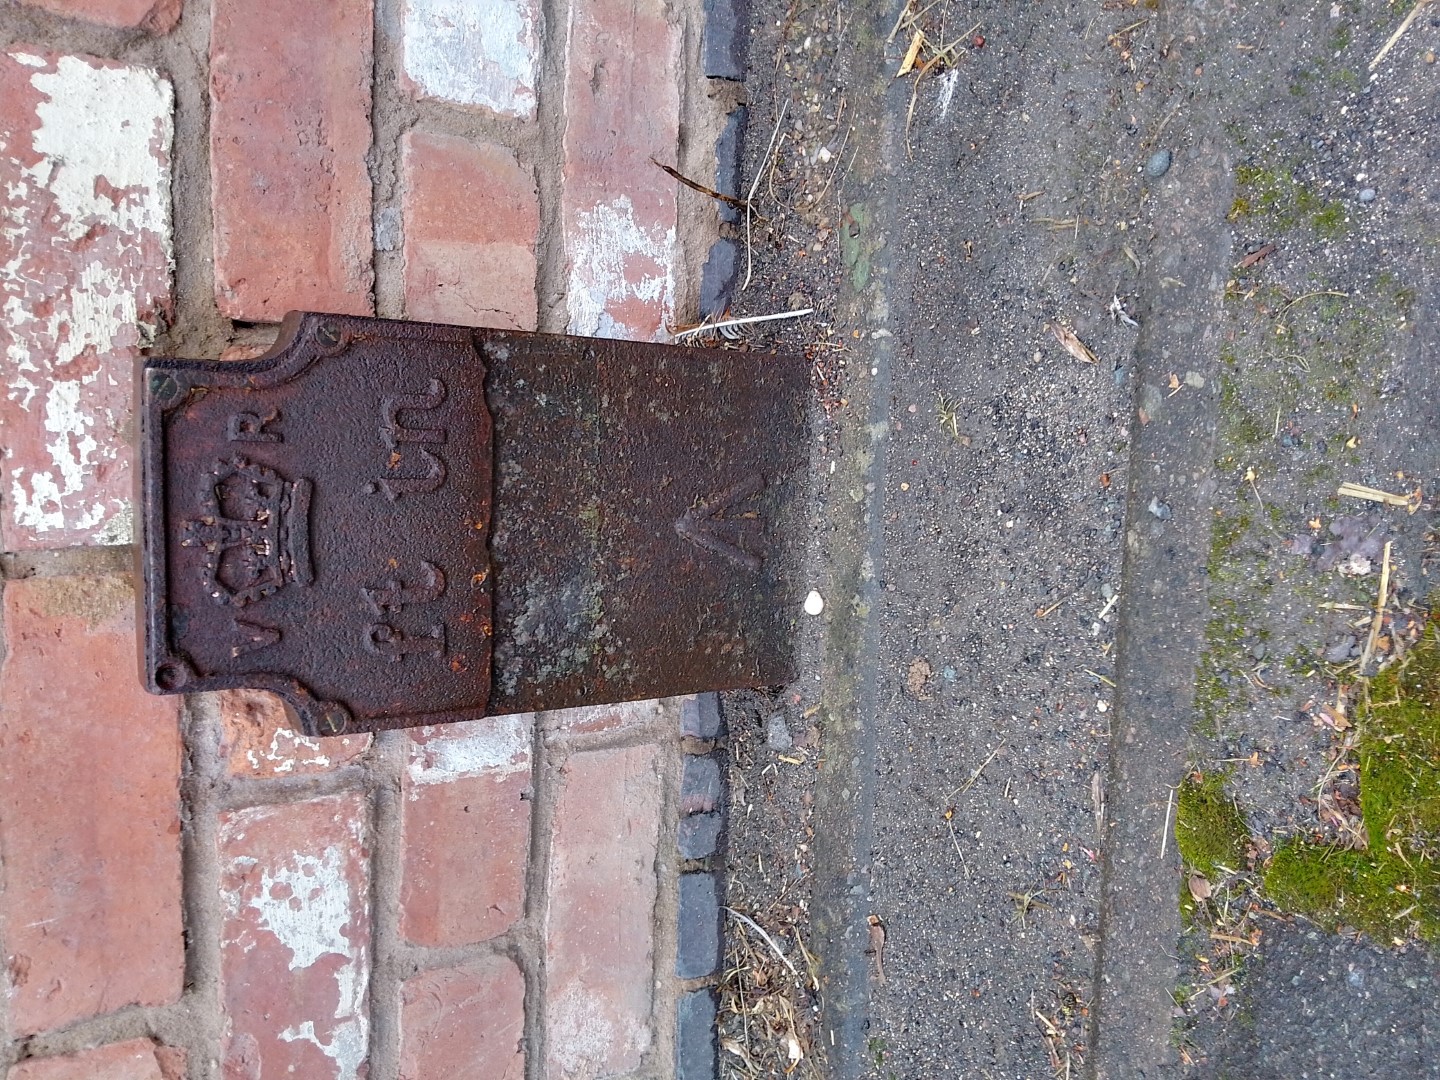 Telegraph cable marker post at opp. entrance to waterworks, Birmingham Road, Hatton Park, nr. Leamington Spa by Derek Pattenson 